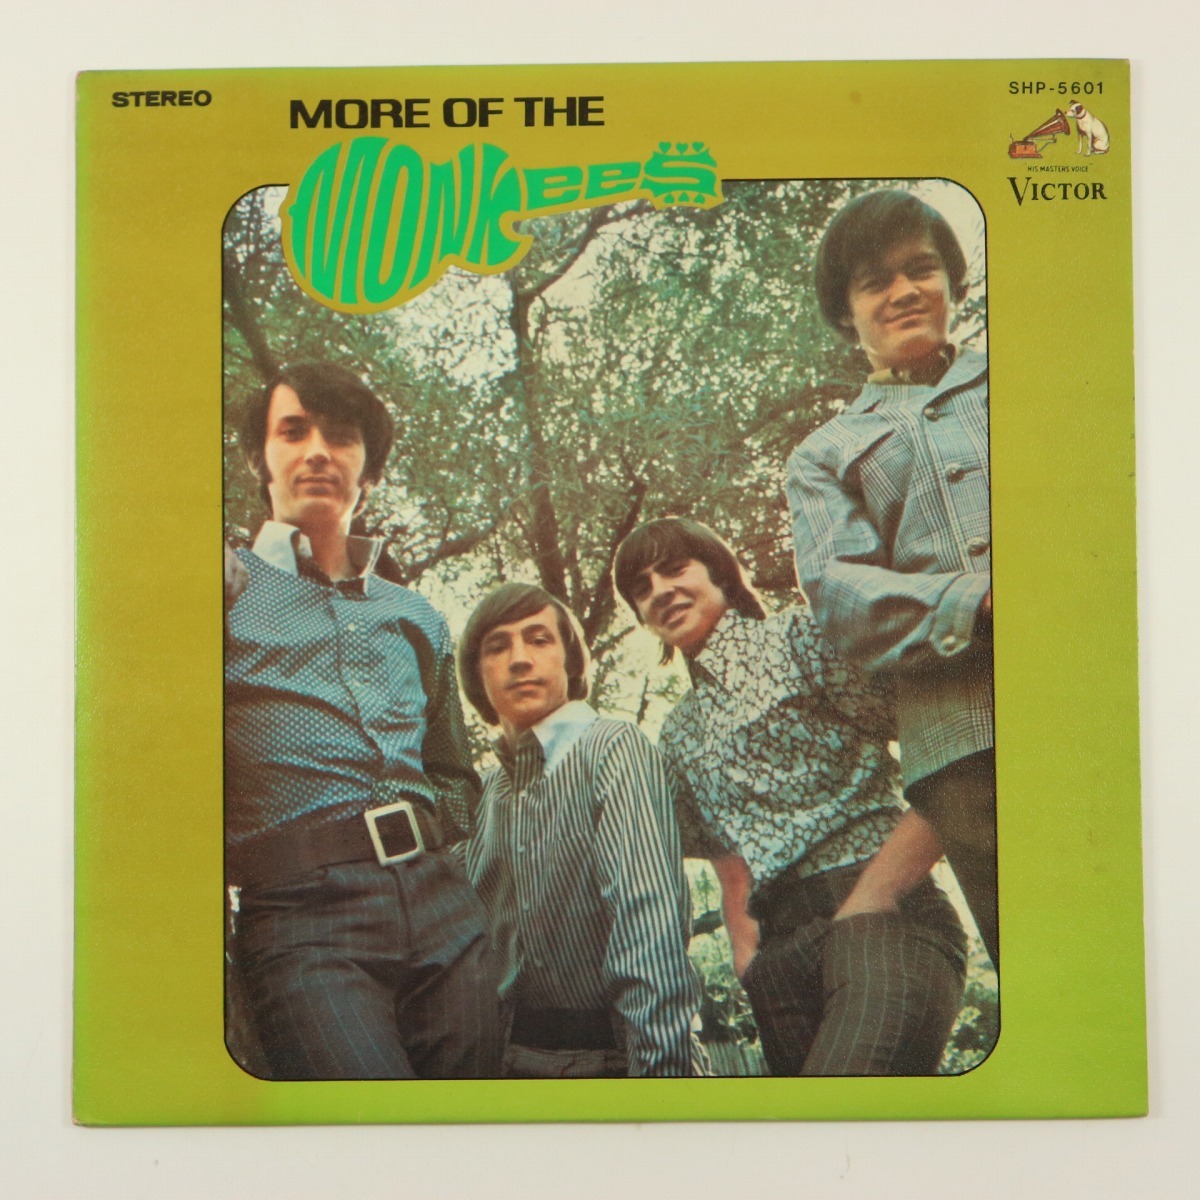 ◆LP◆THE MONKEES/モンキーズ◆MORE OF THE MONKEES/アイム・ア・ビリーヴァー◆国内盤◆Victor SHP-5601_画像1